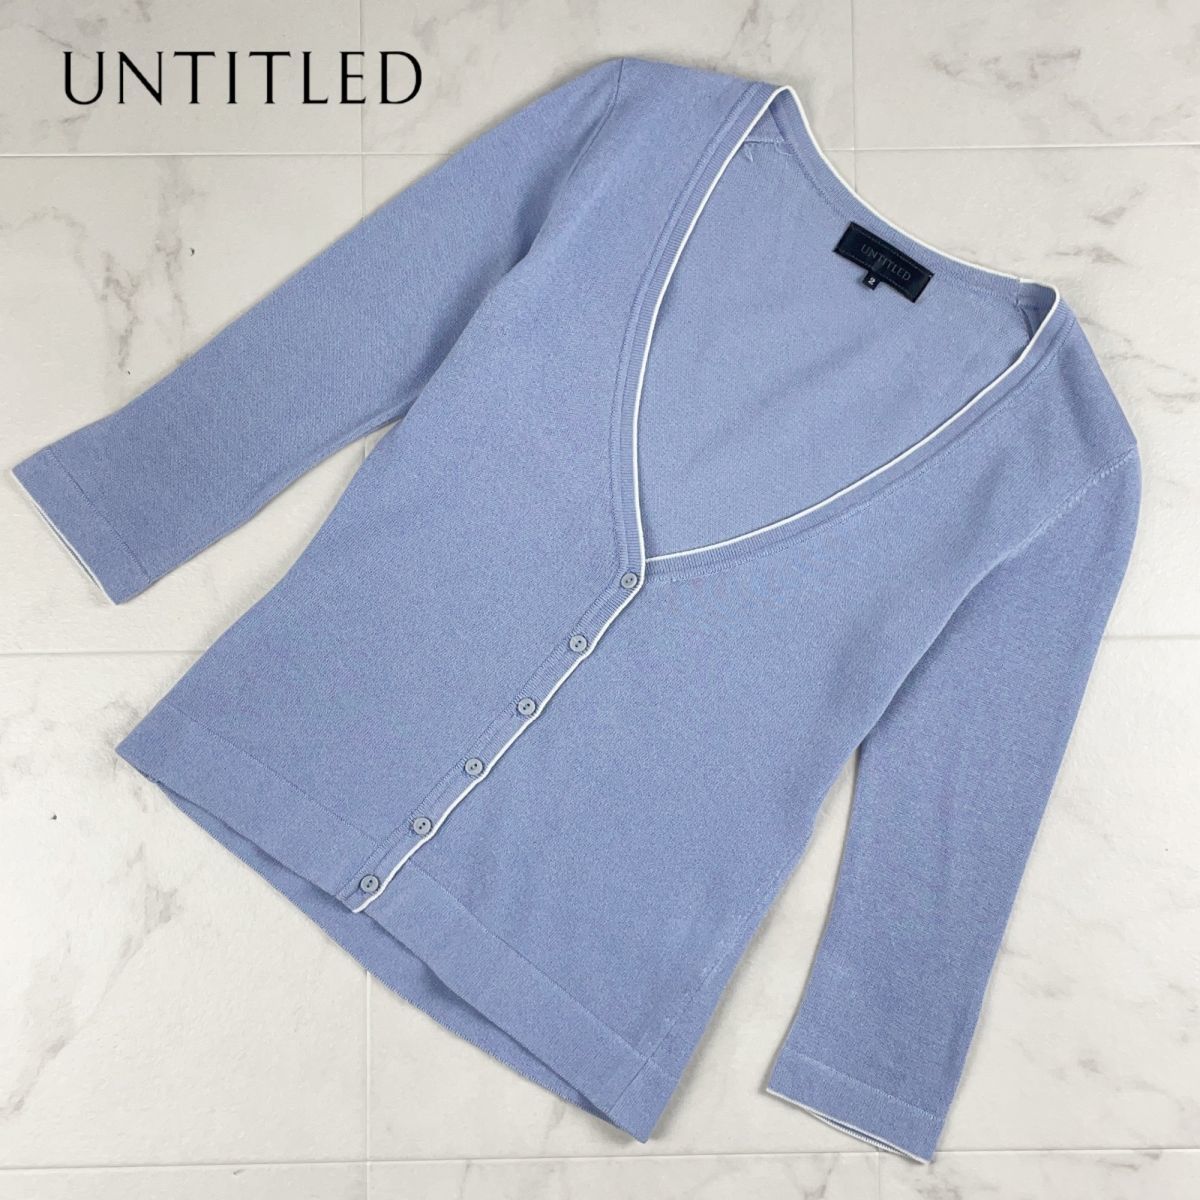  beautiful goods UNTITLED Untitled 7 minute sleeve knitted cardigan V neck tops lady's light blue light blue size 2*GC492